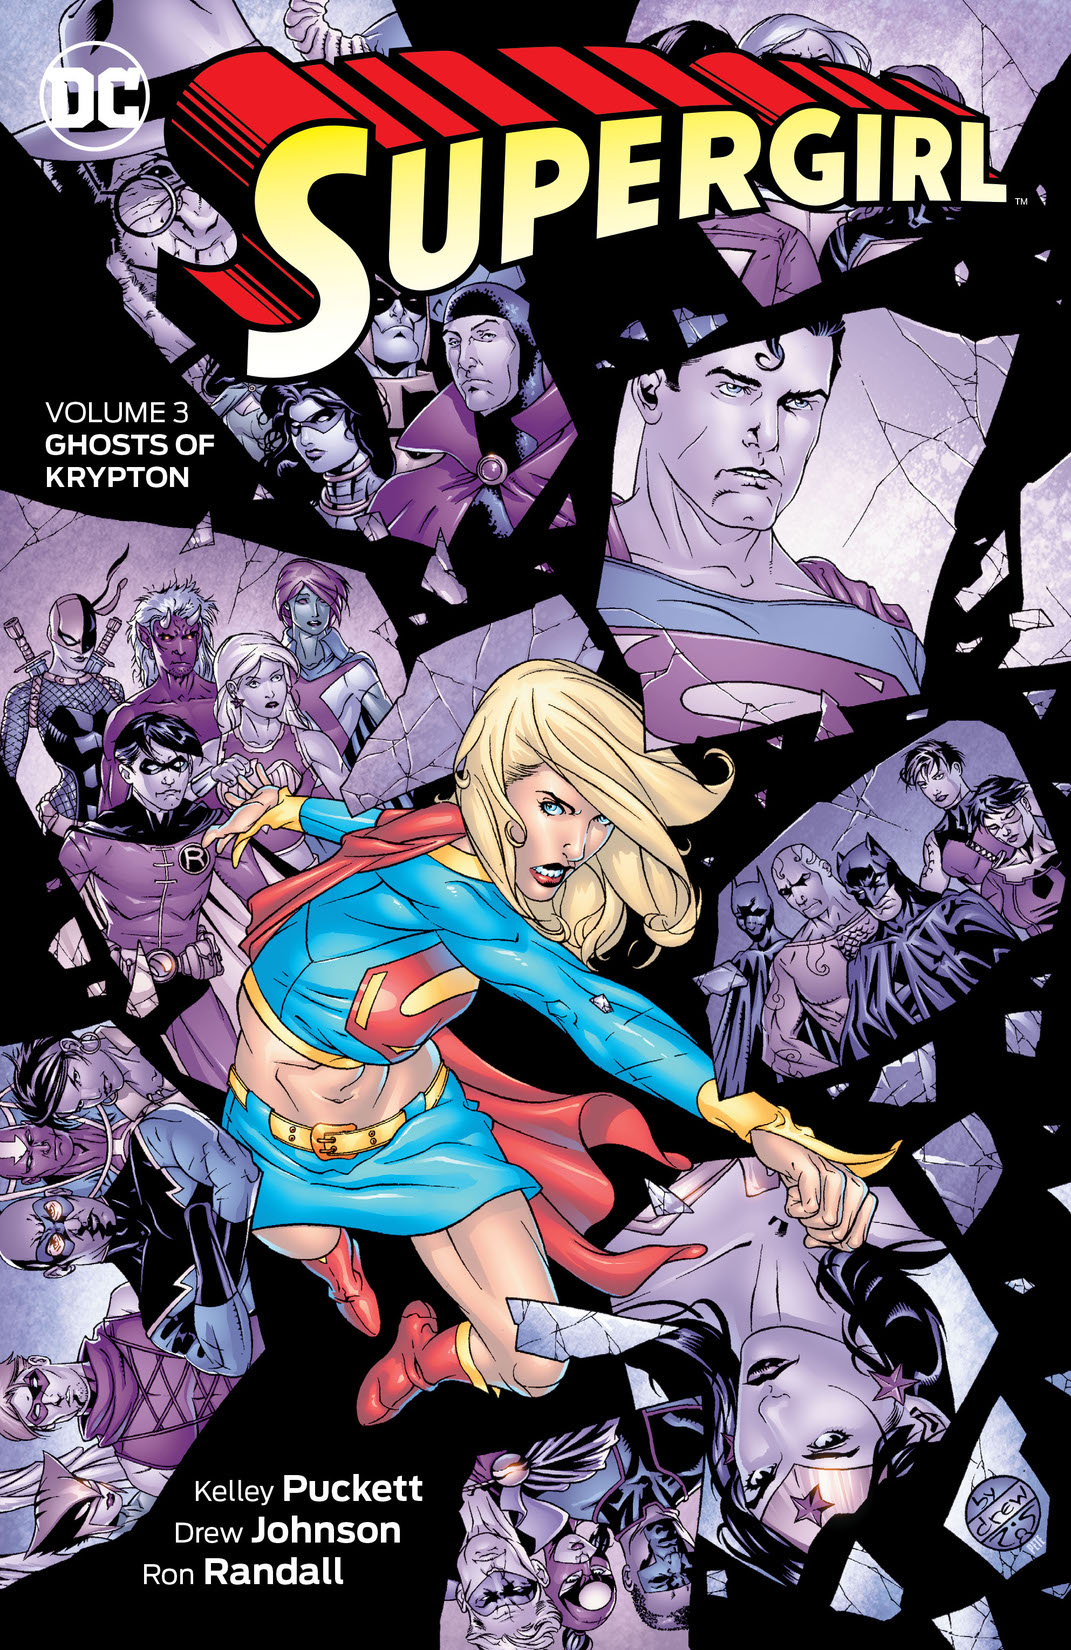 Supergirl Vol. 3: Ghosts of Krypton preview images